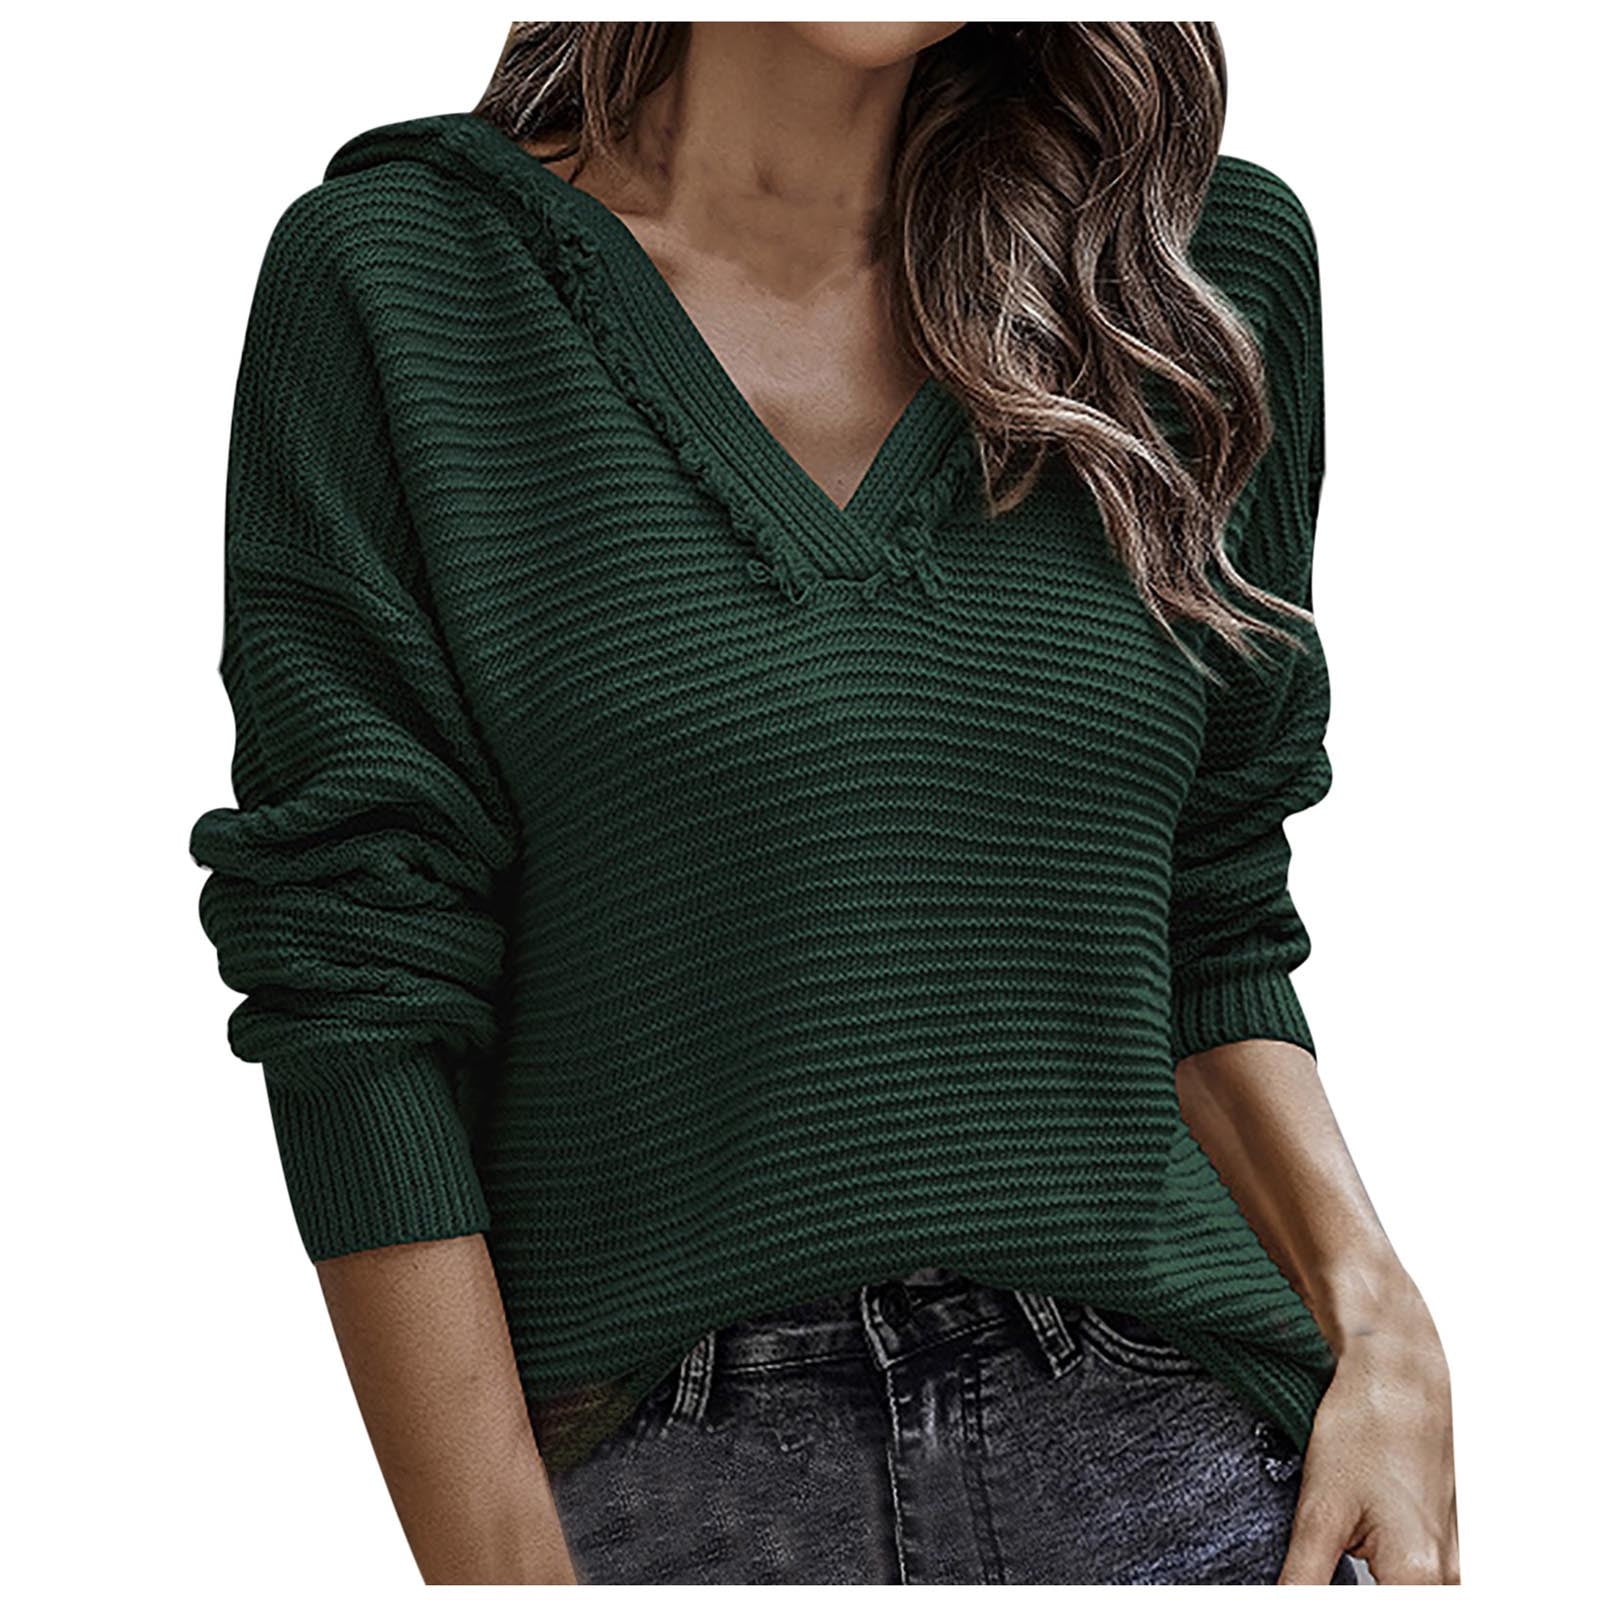 SMihono Clearance Cowl Neck Knitted Sweaters Knitwear Womens Plus Long  Sleeve Fashion Solid Casual Tops for Women Female Leisure White XXXL 